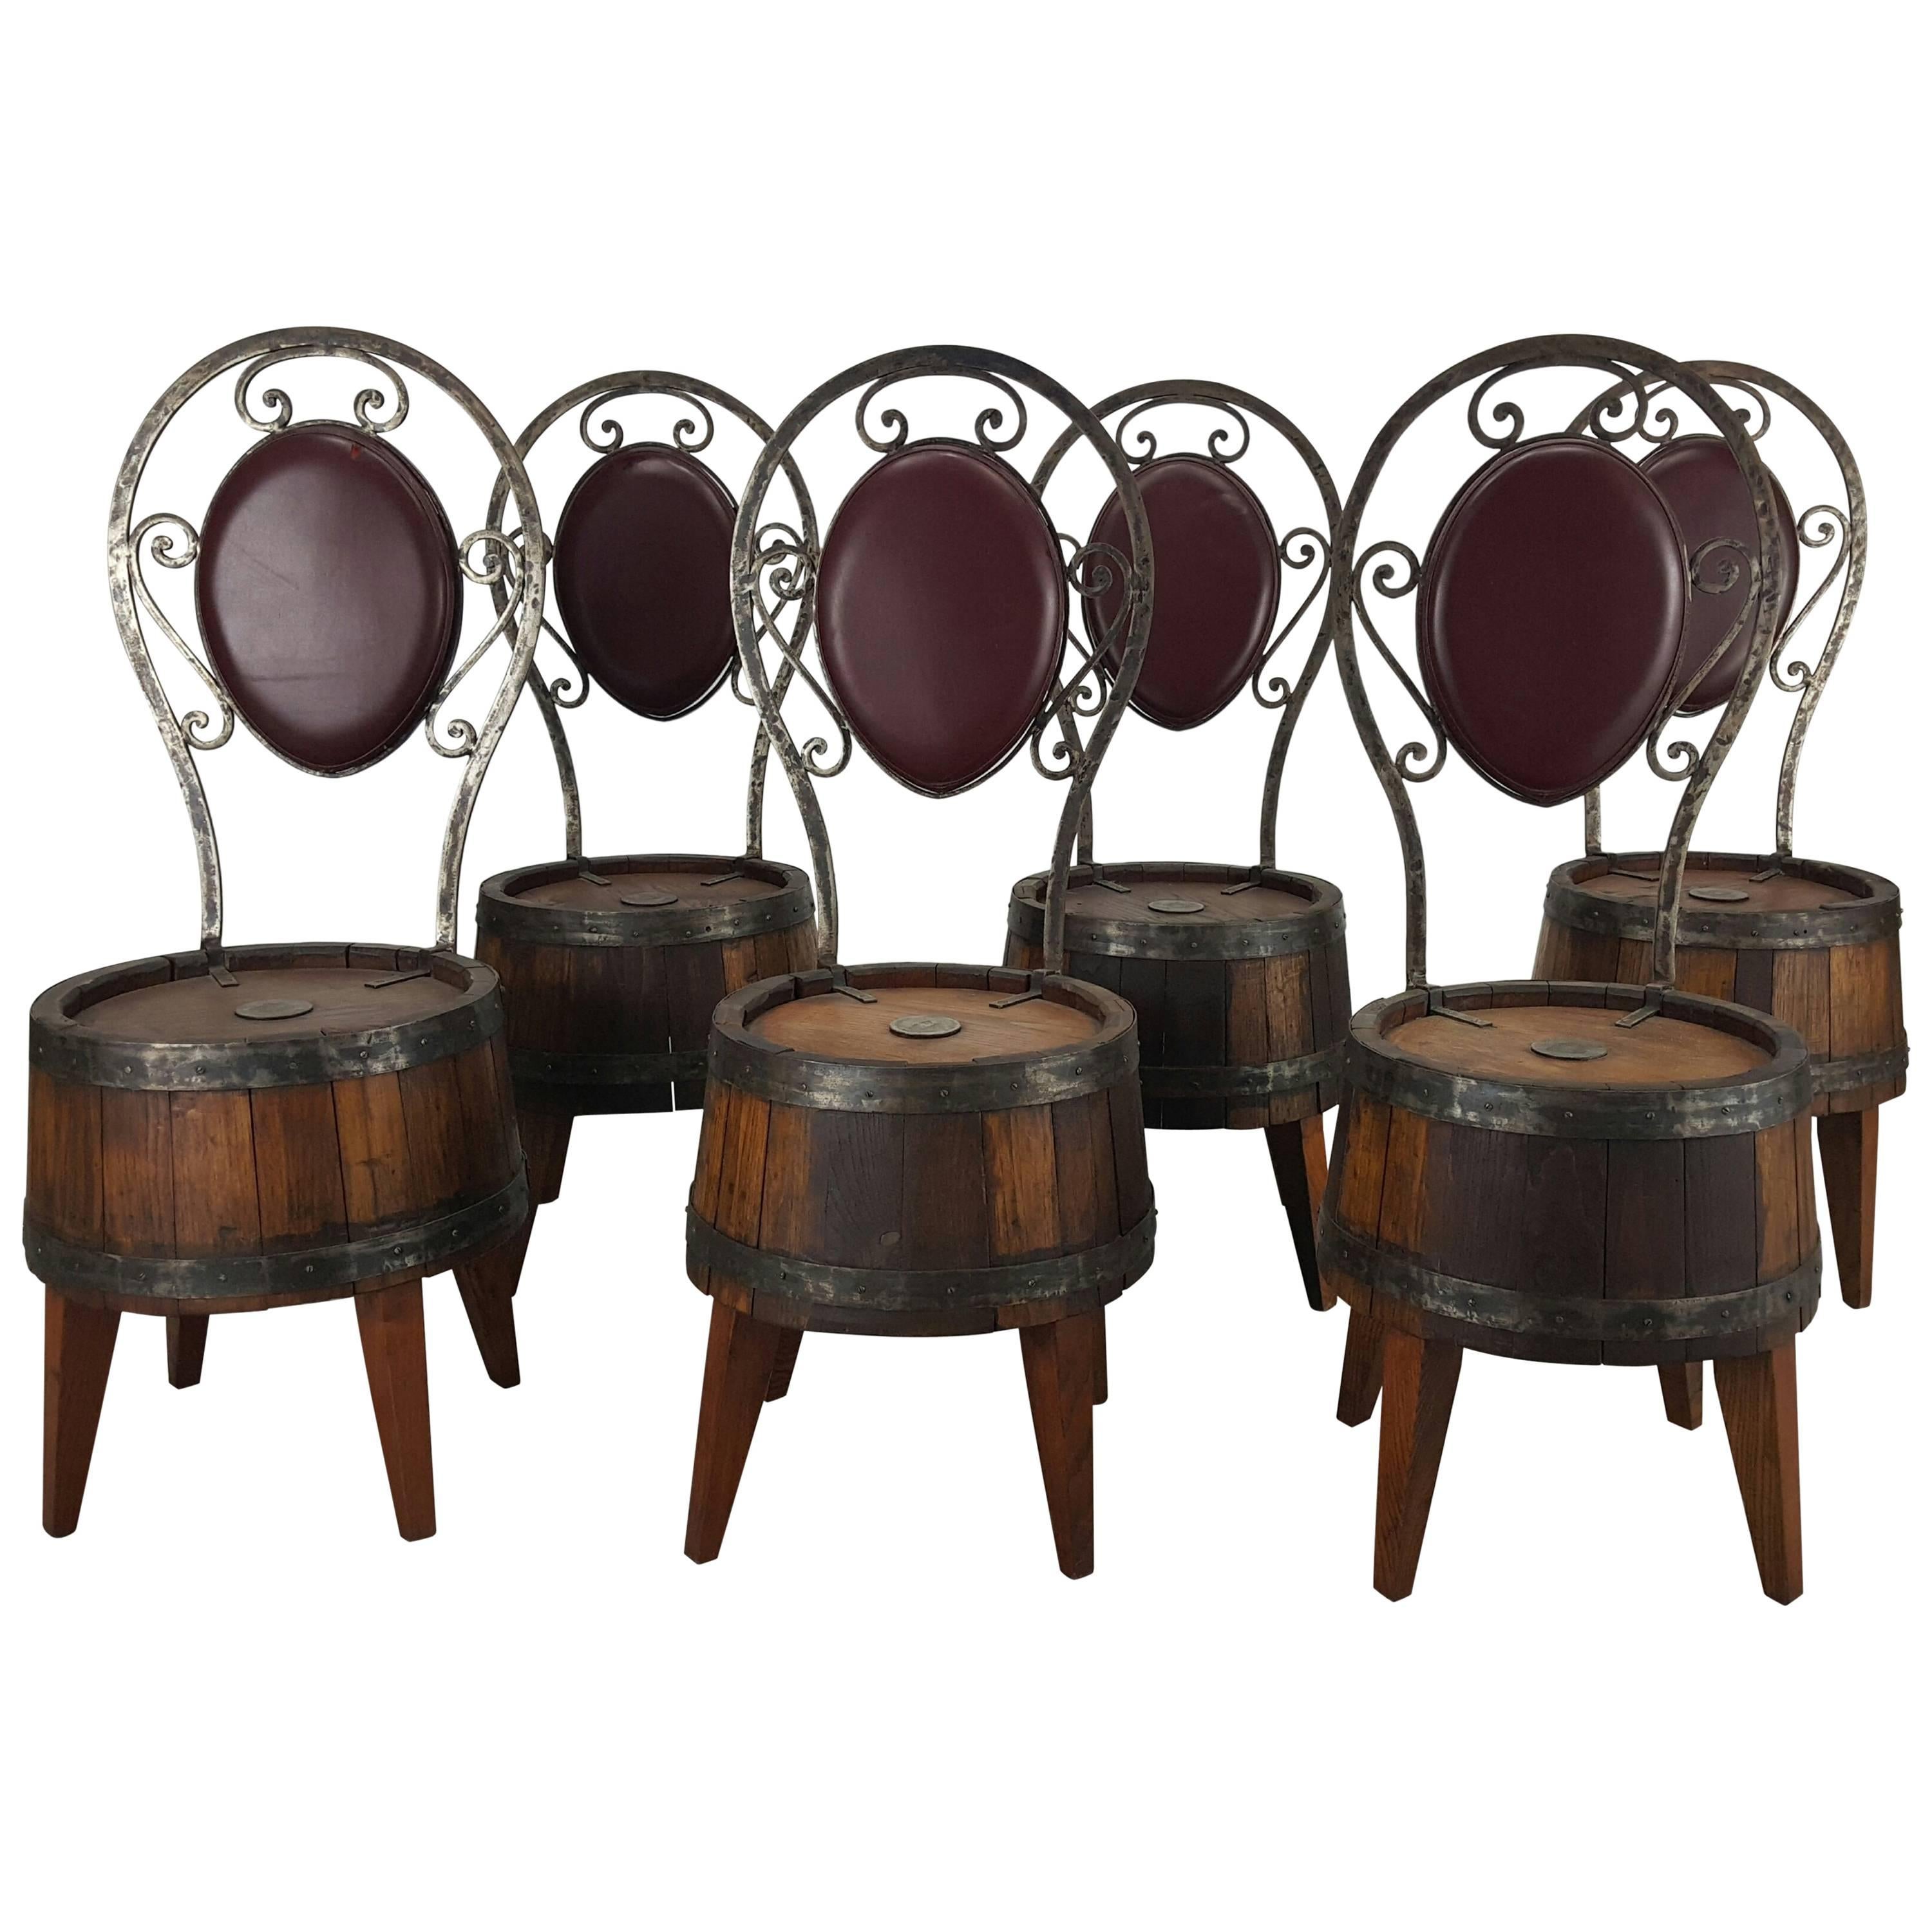 Unusual Set of Six Whiskey Barrel and Hammered Iron Pub Chairs